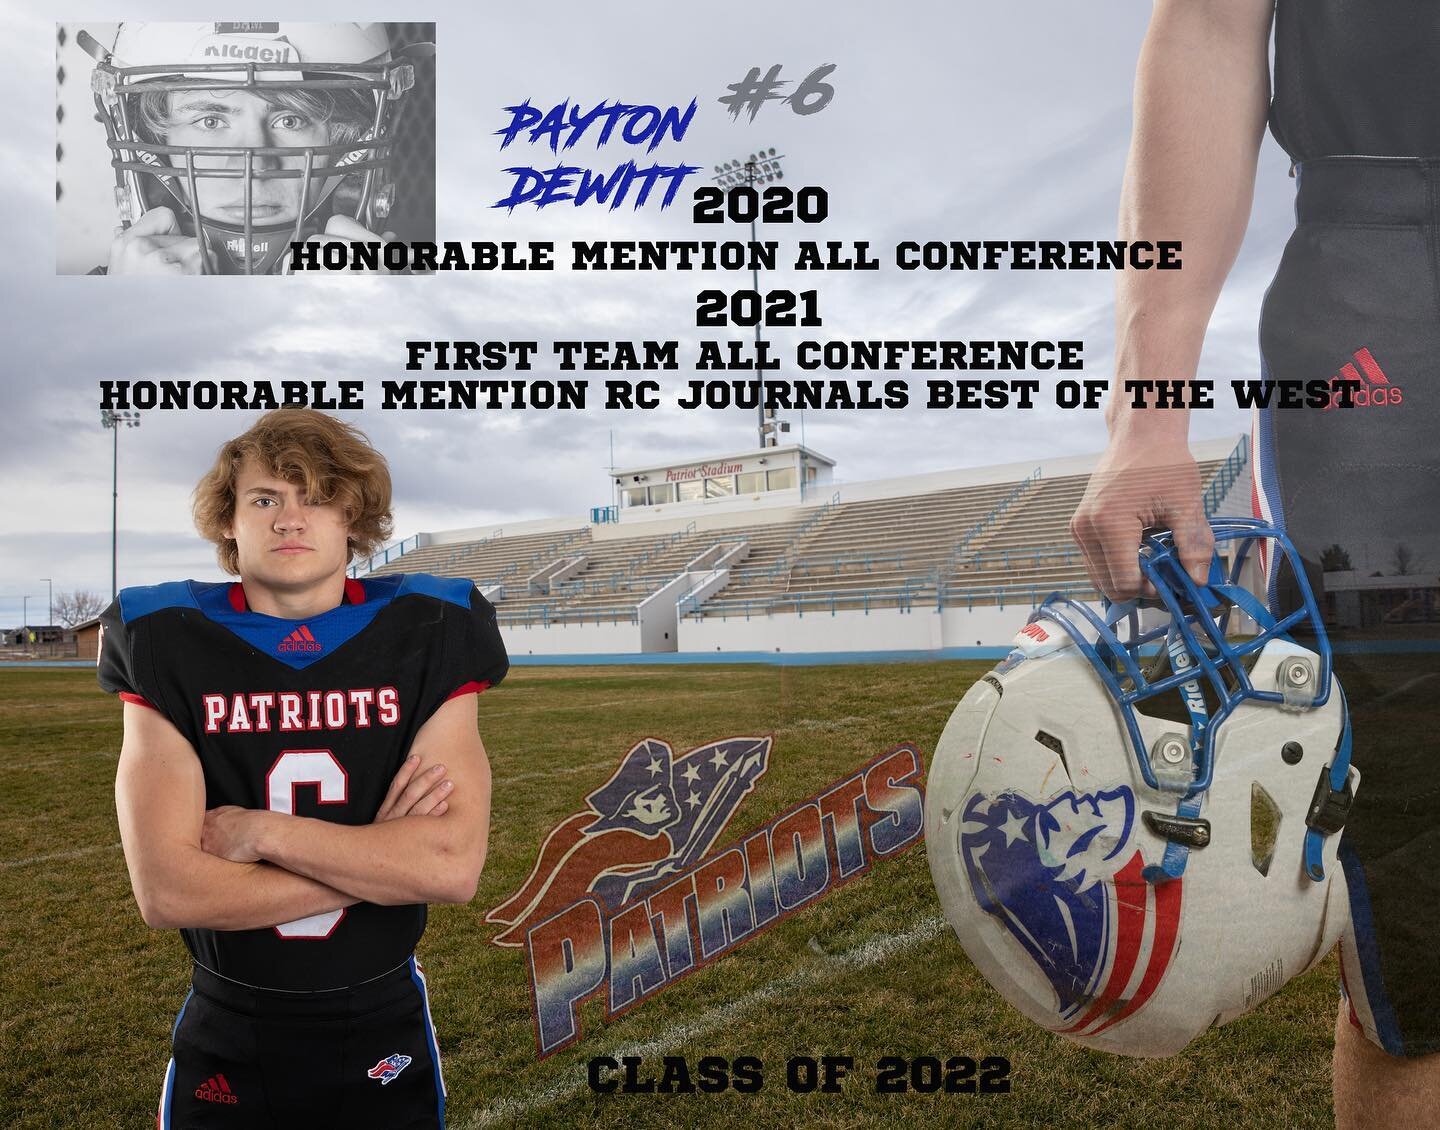 Congratulations to these young men and all they&rsquo;ve accomplished! 
Patriot Pride!
#douglaspatriots #patriotpride #dhspatriots